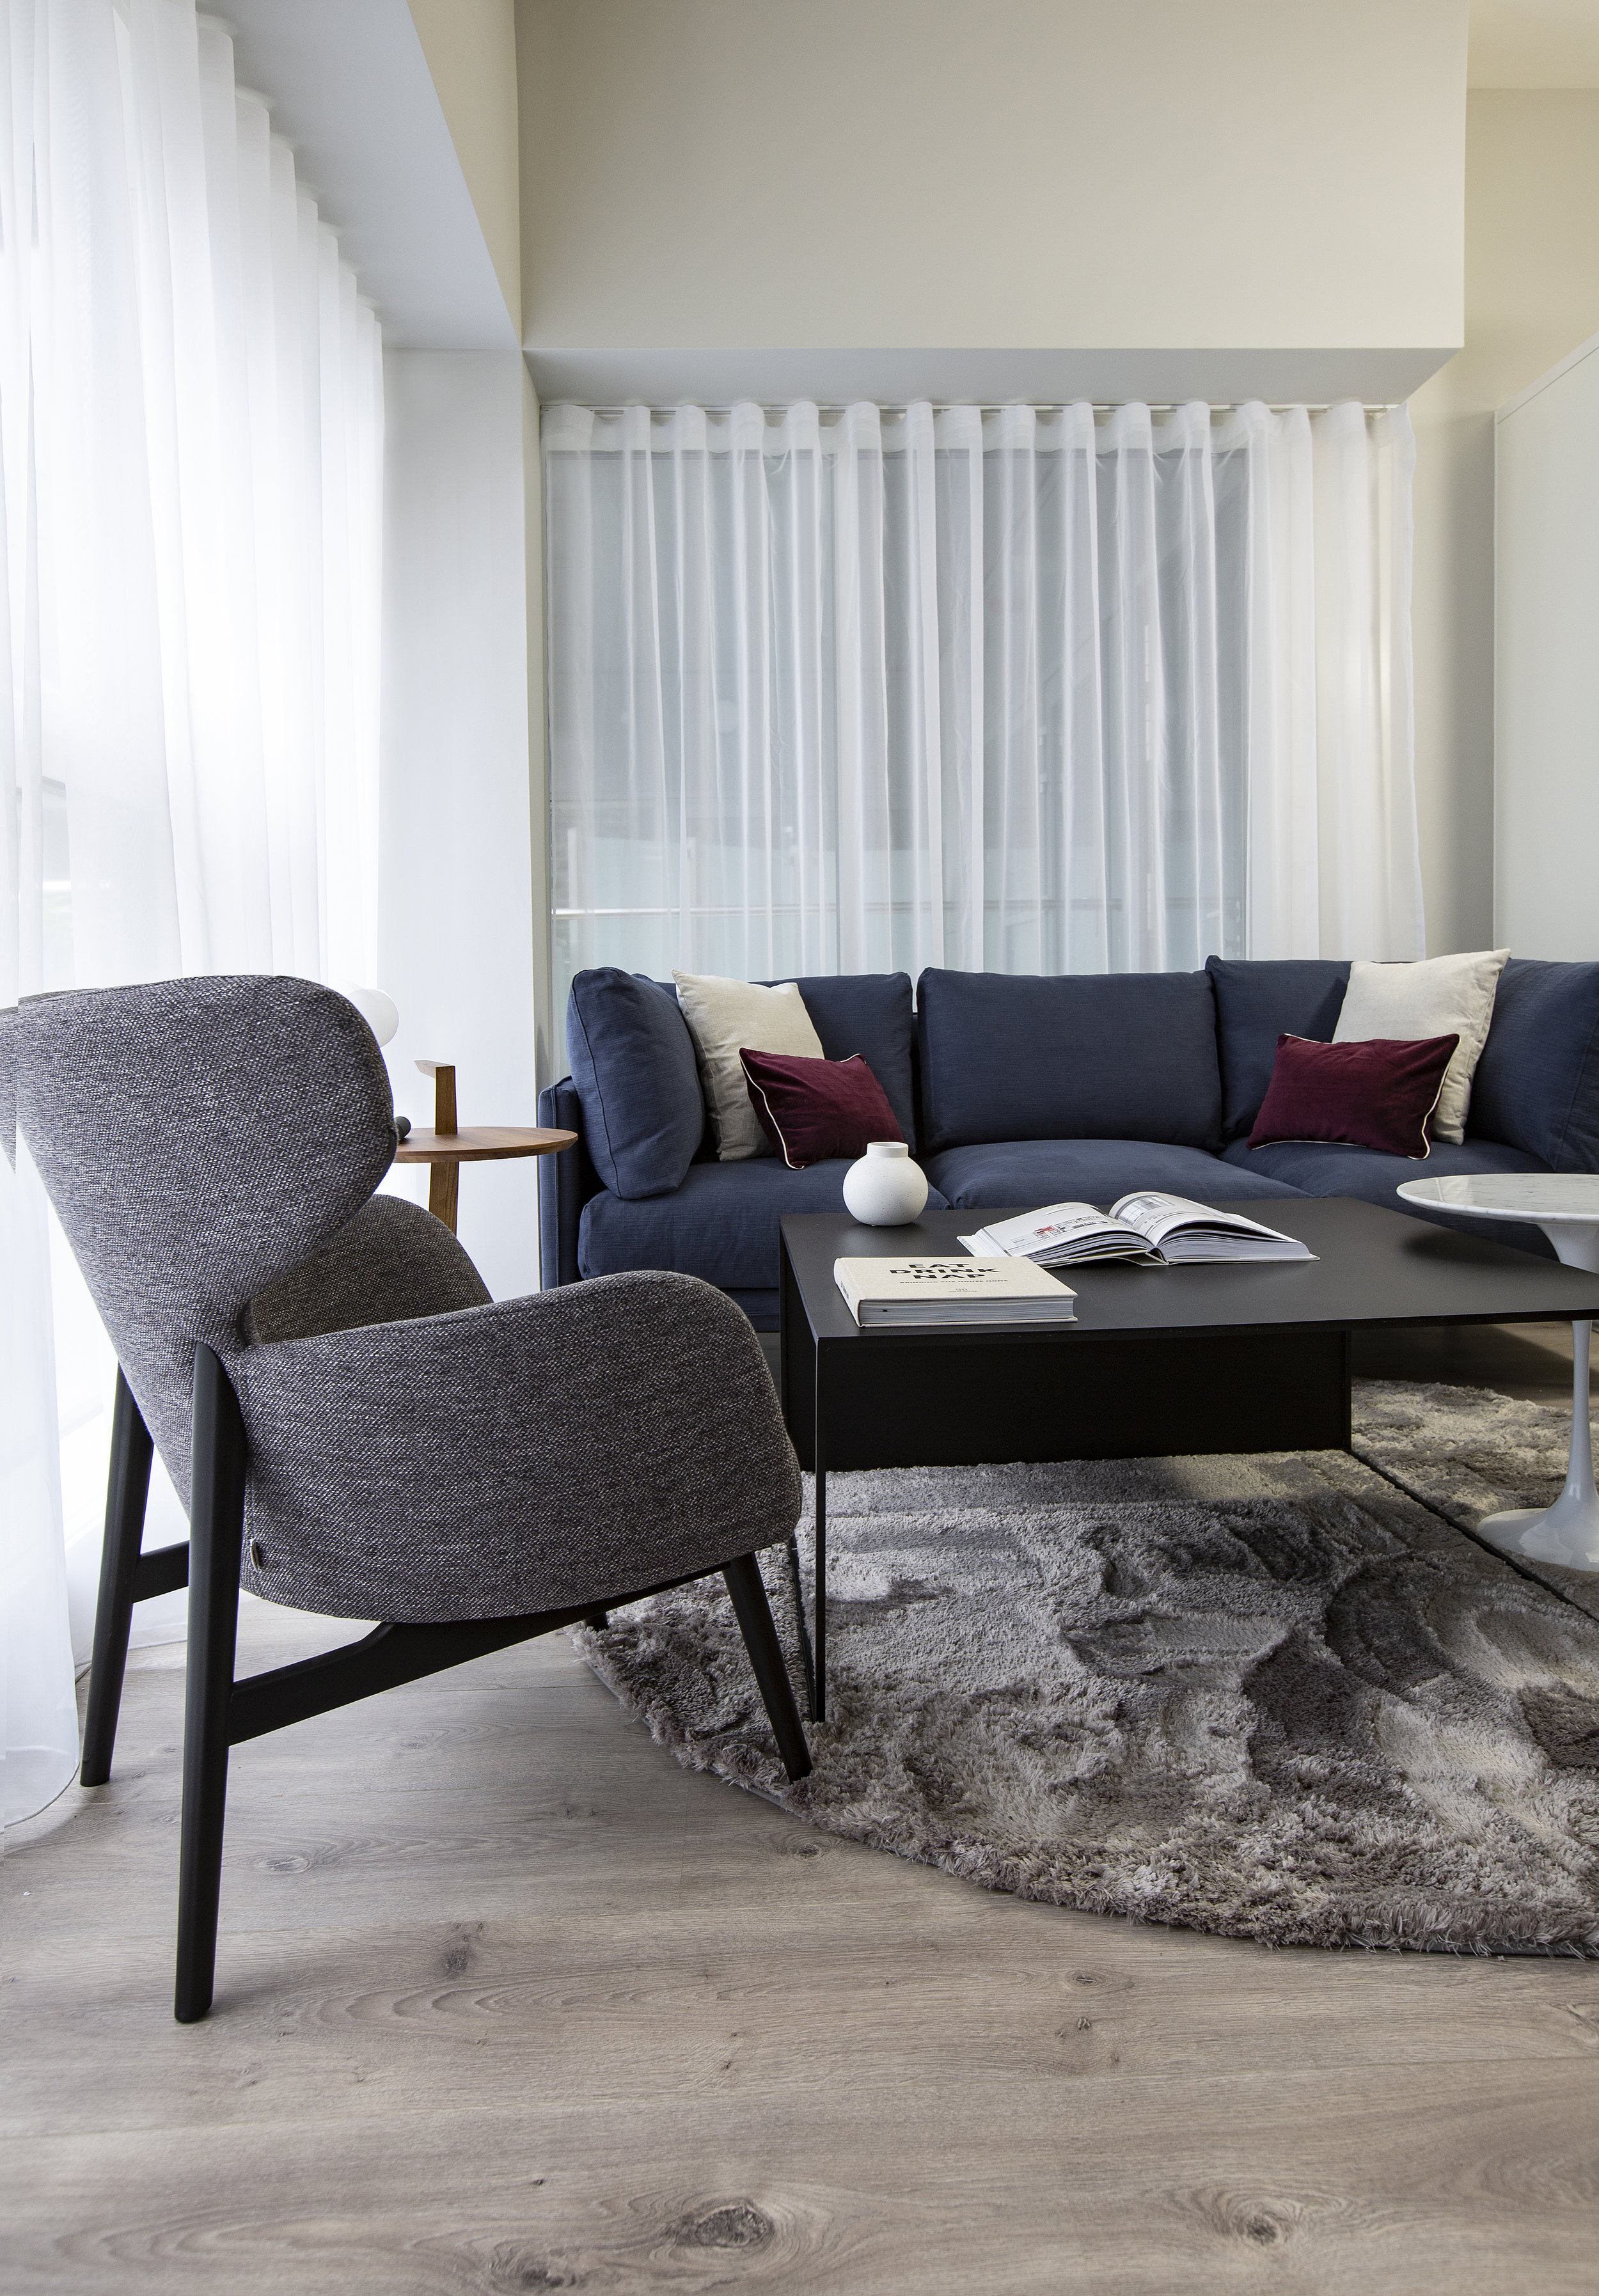 Hanover court with park developments. blue couch and circle marble rug